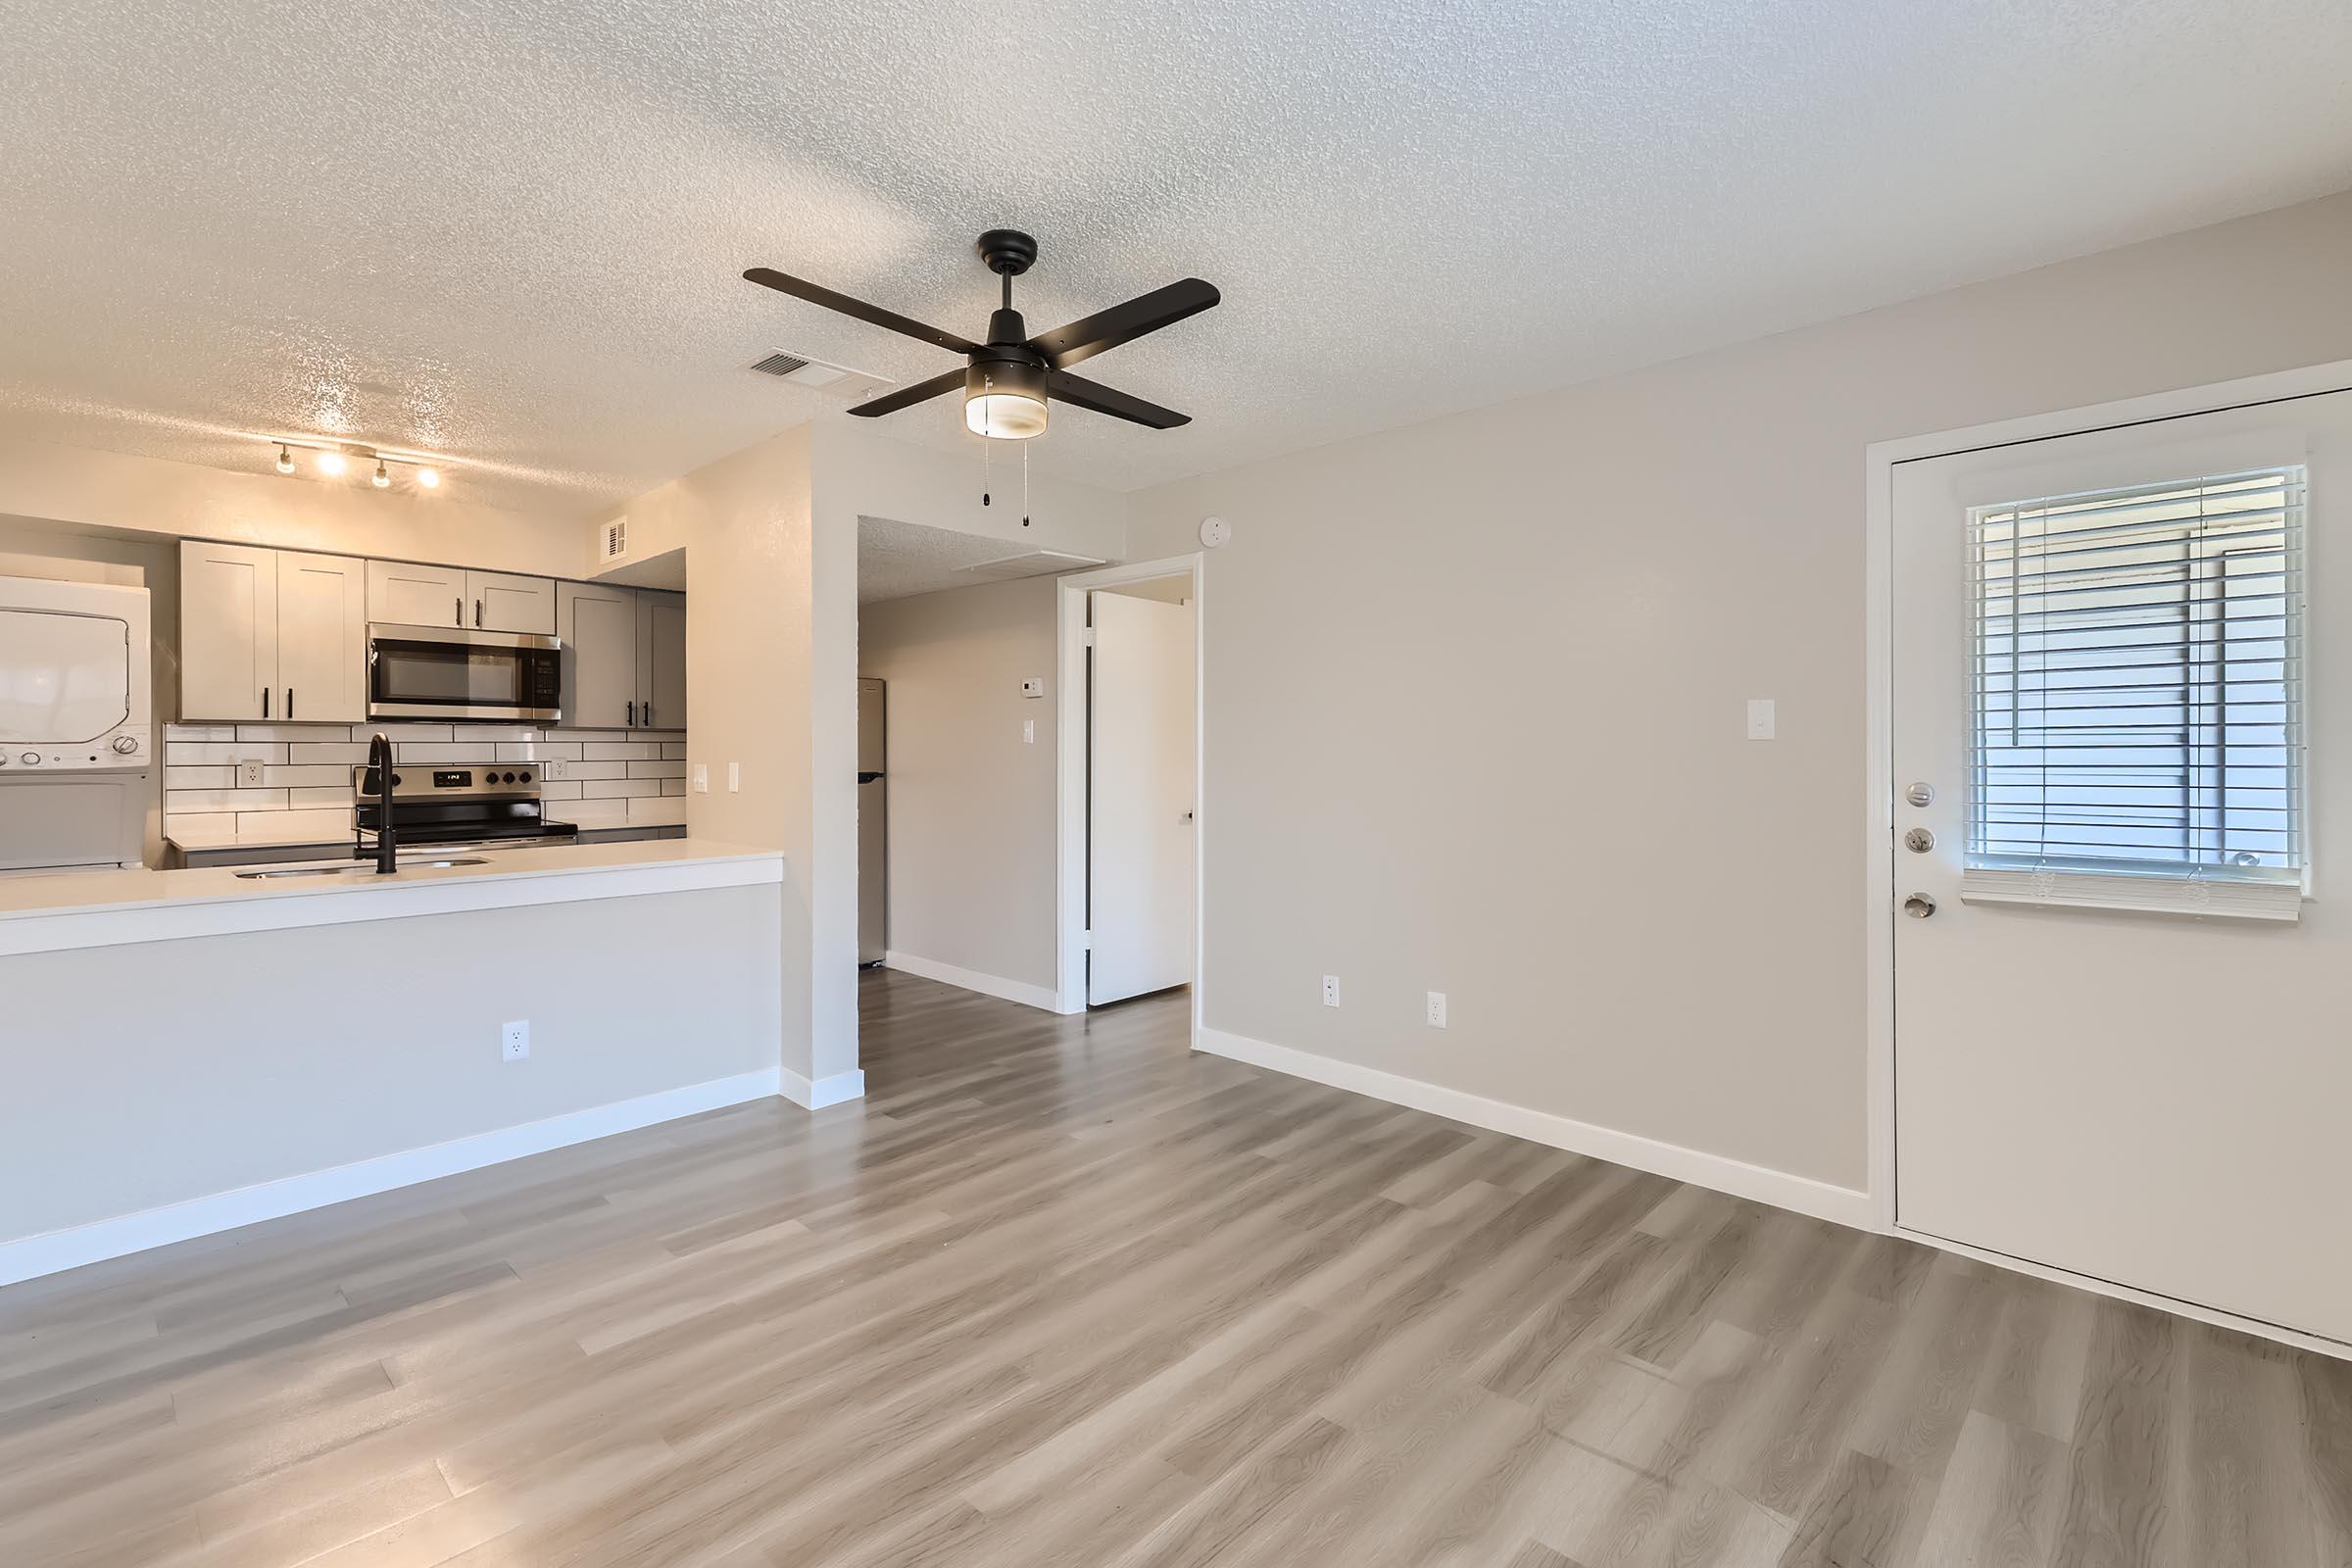 A large living room with a kitchen and a hallway to the bedrooms at Rise Oak Creek.